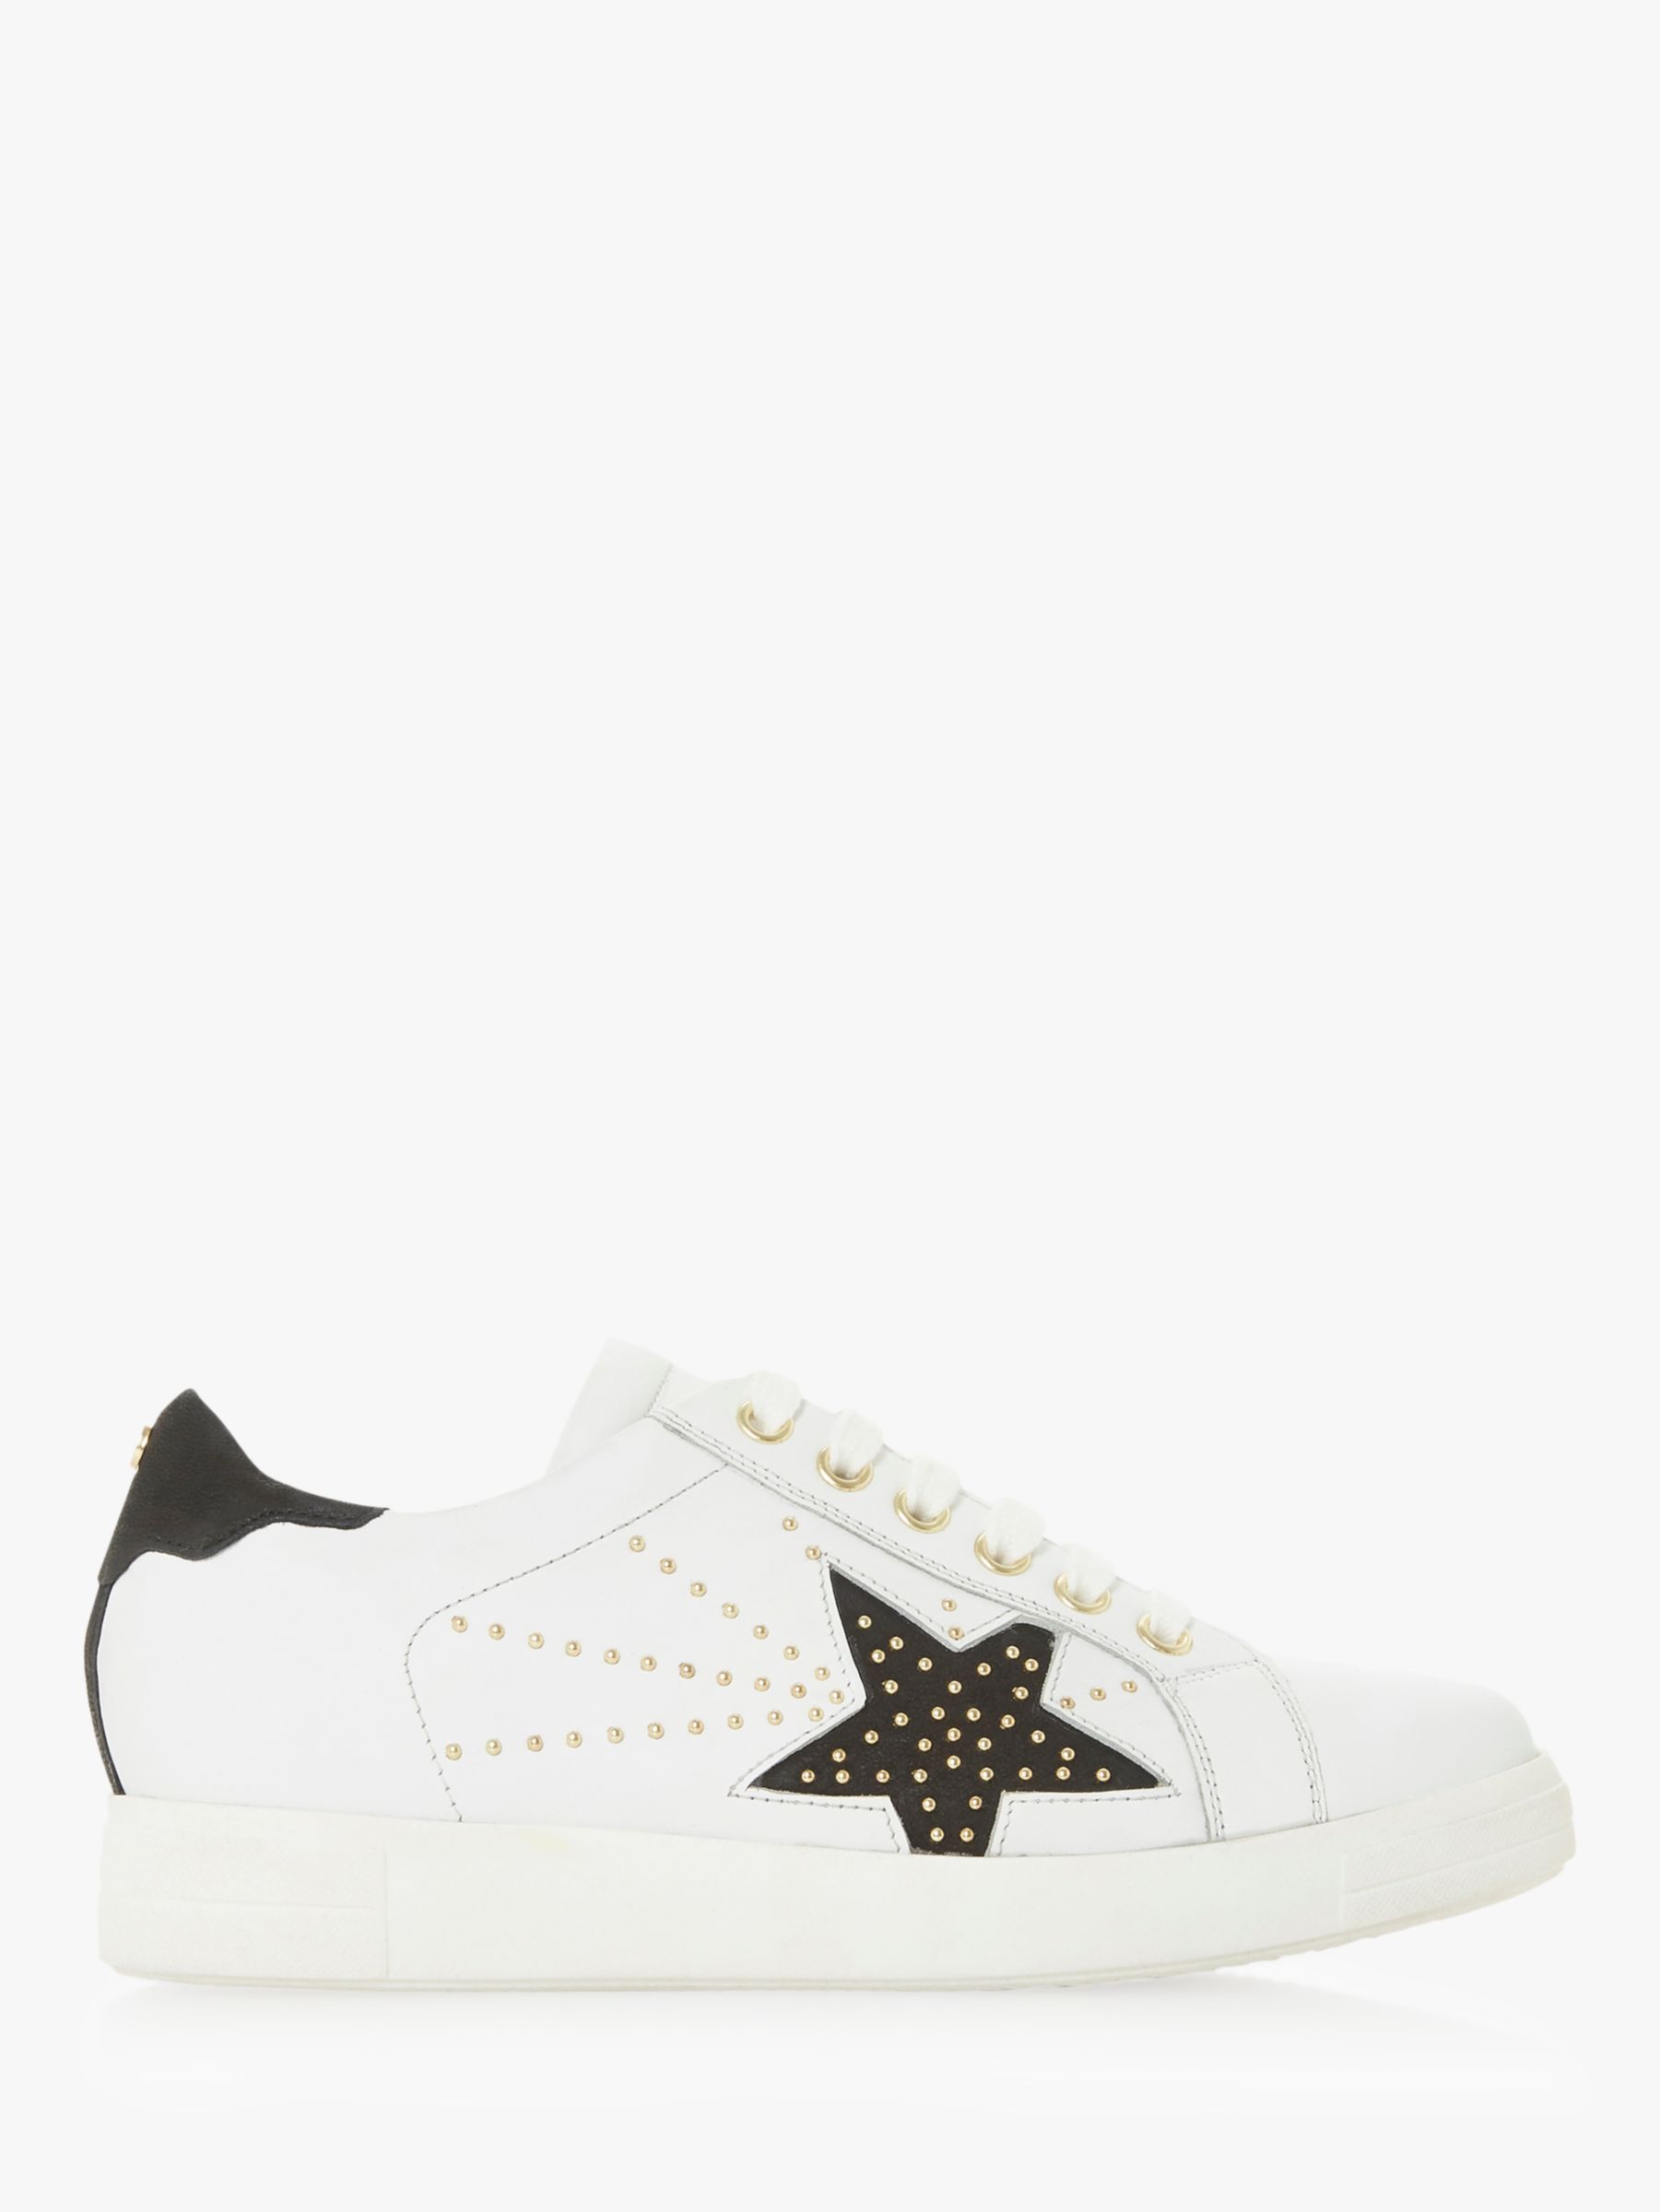 Dune Edris Stud Lace Up Star Trainers, White